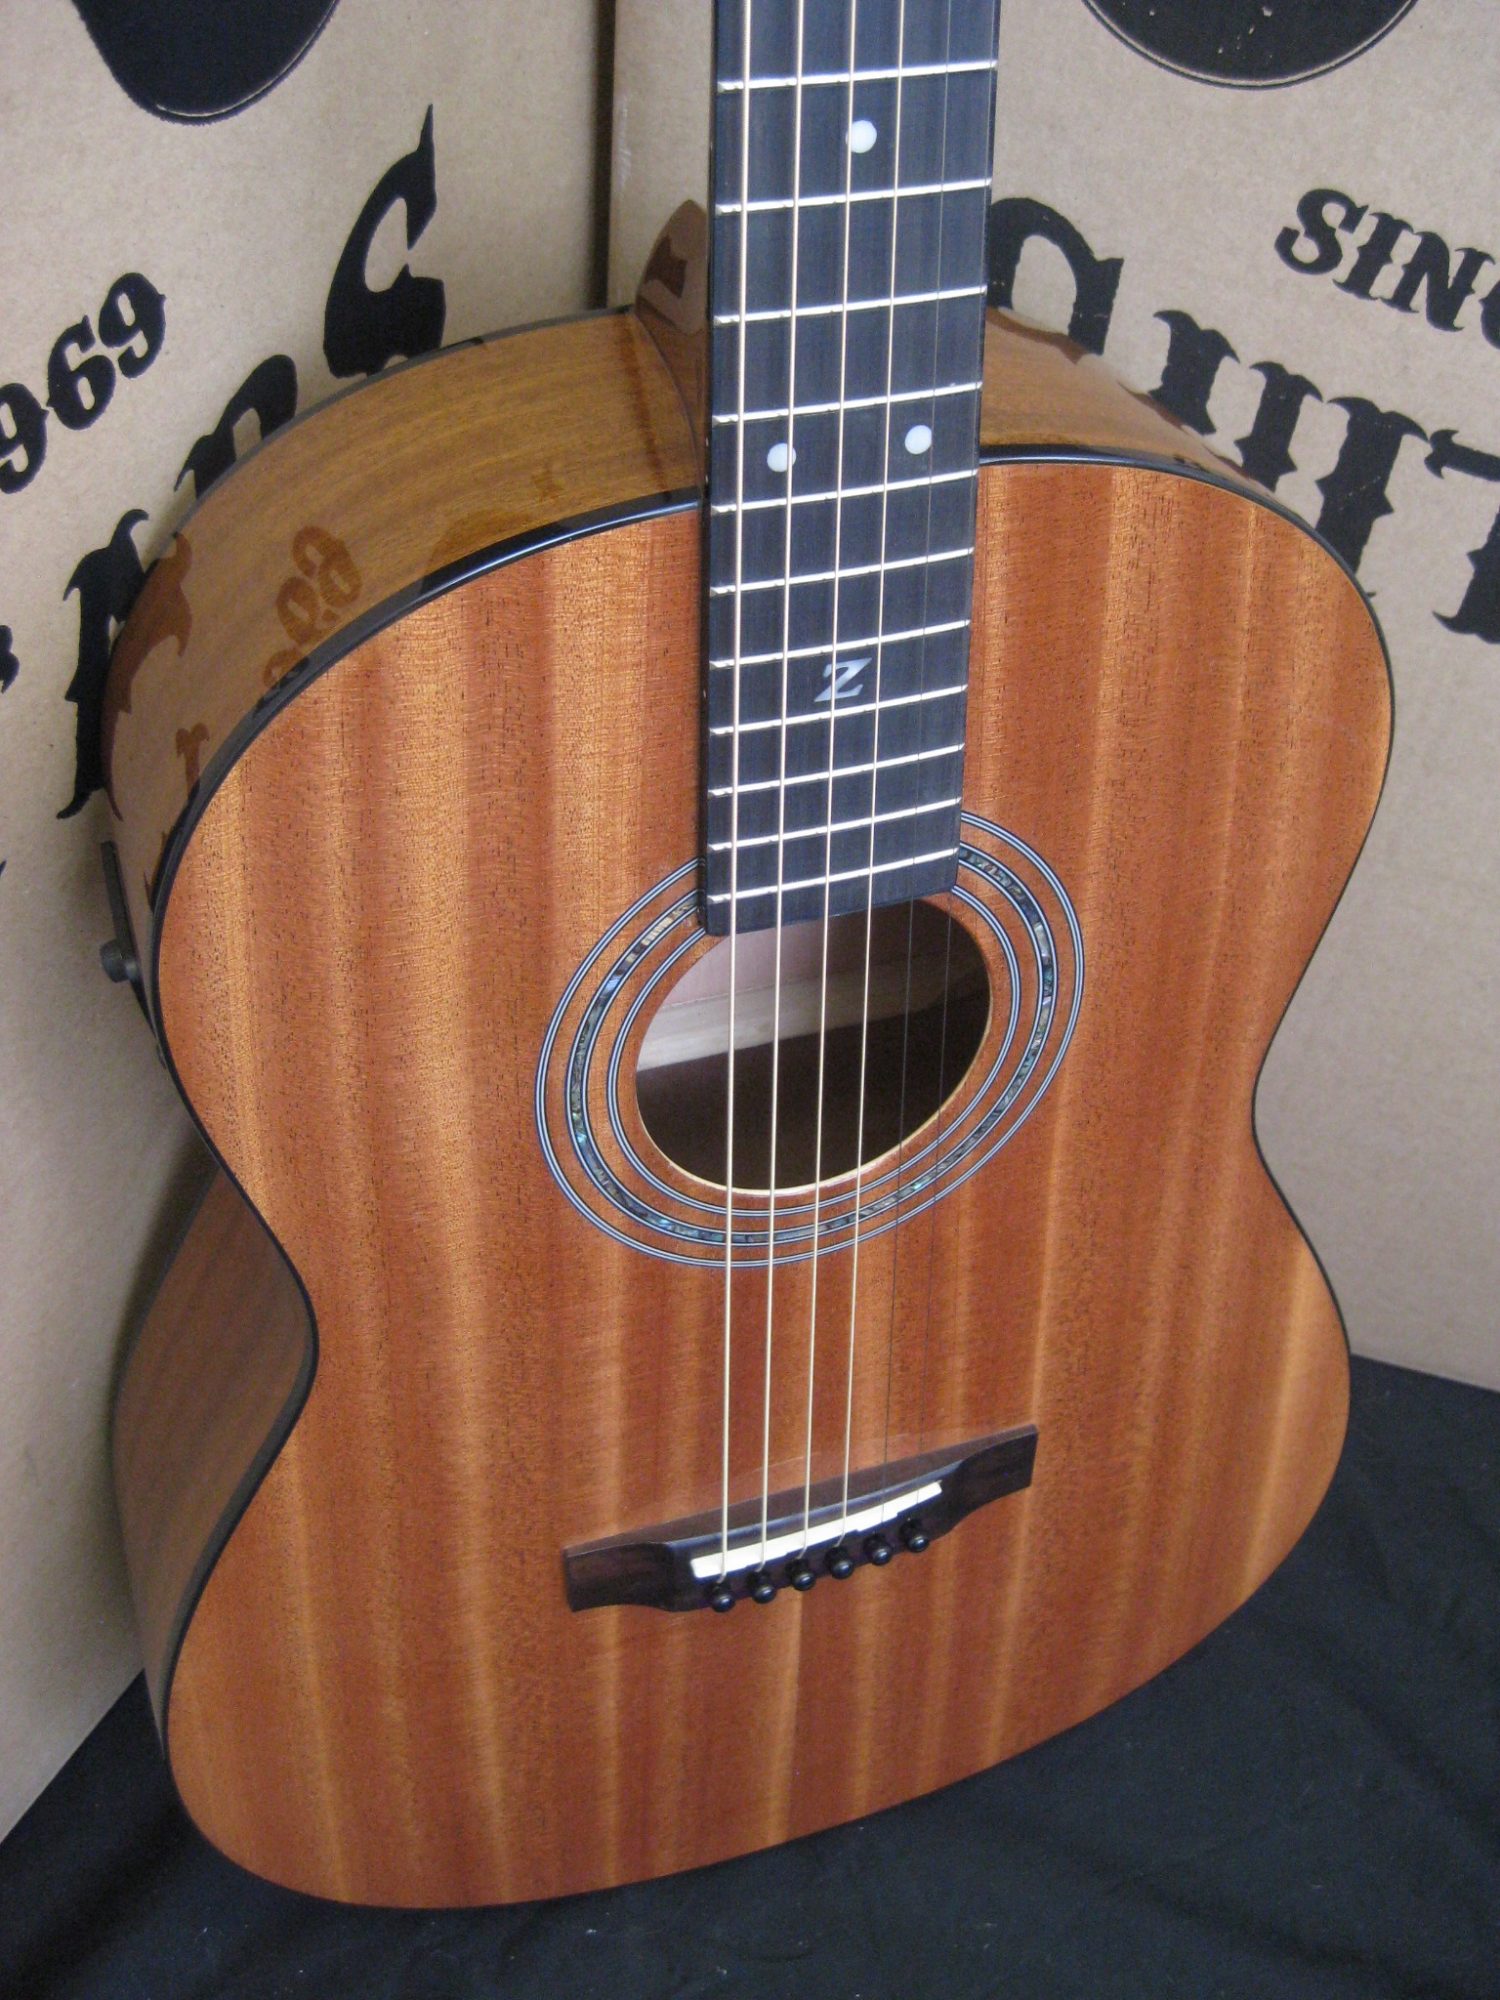 1892-parlor-e-acoustic-electric-discount-guitar-zager-guitars